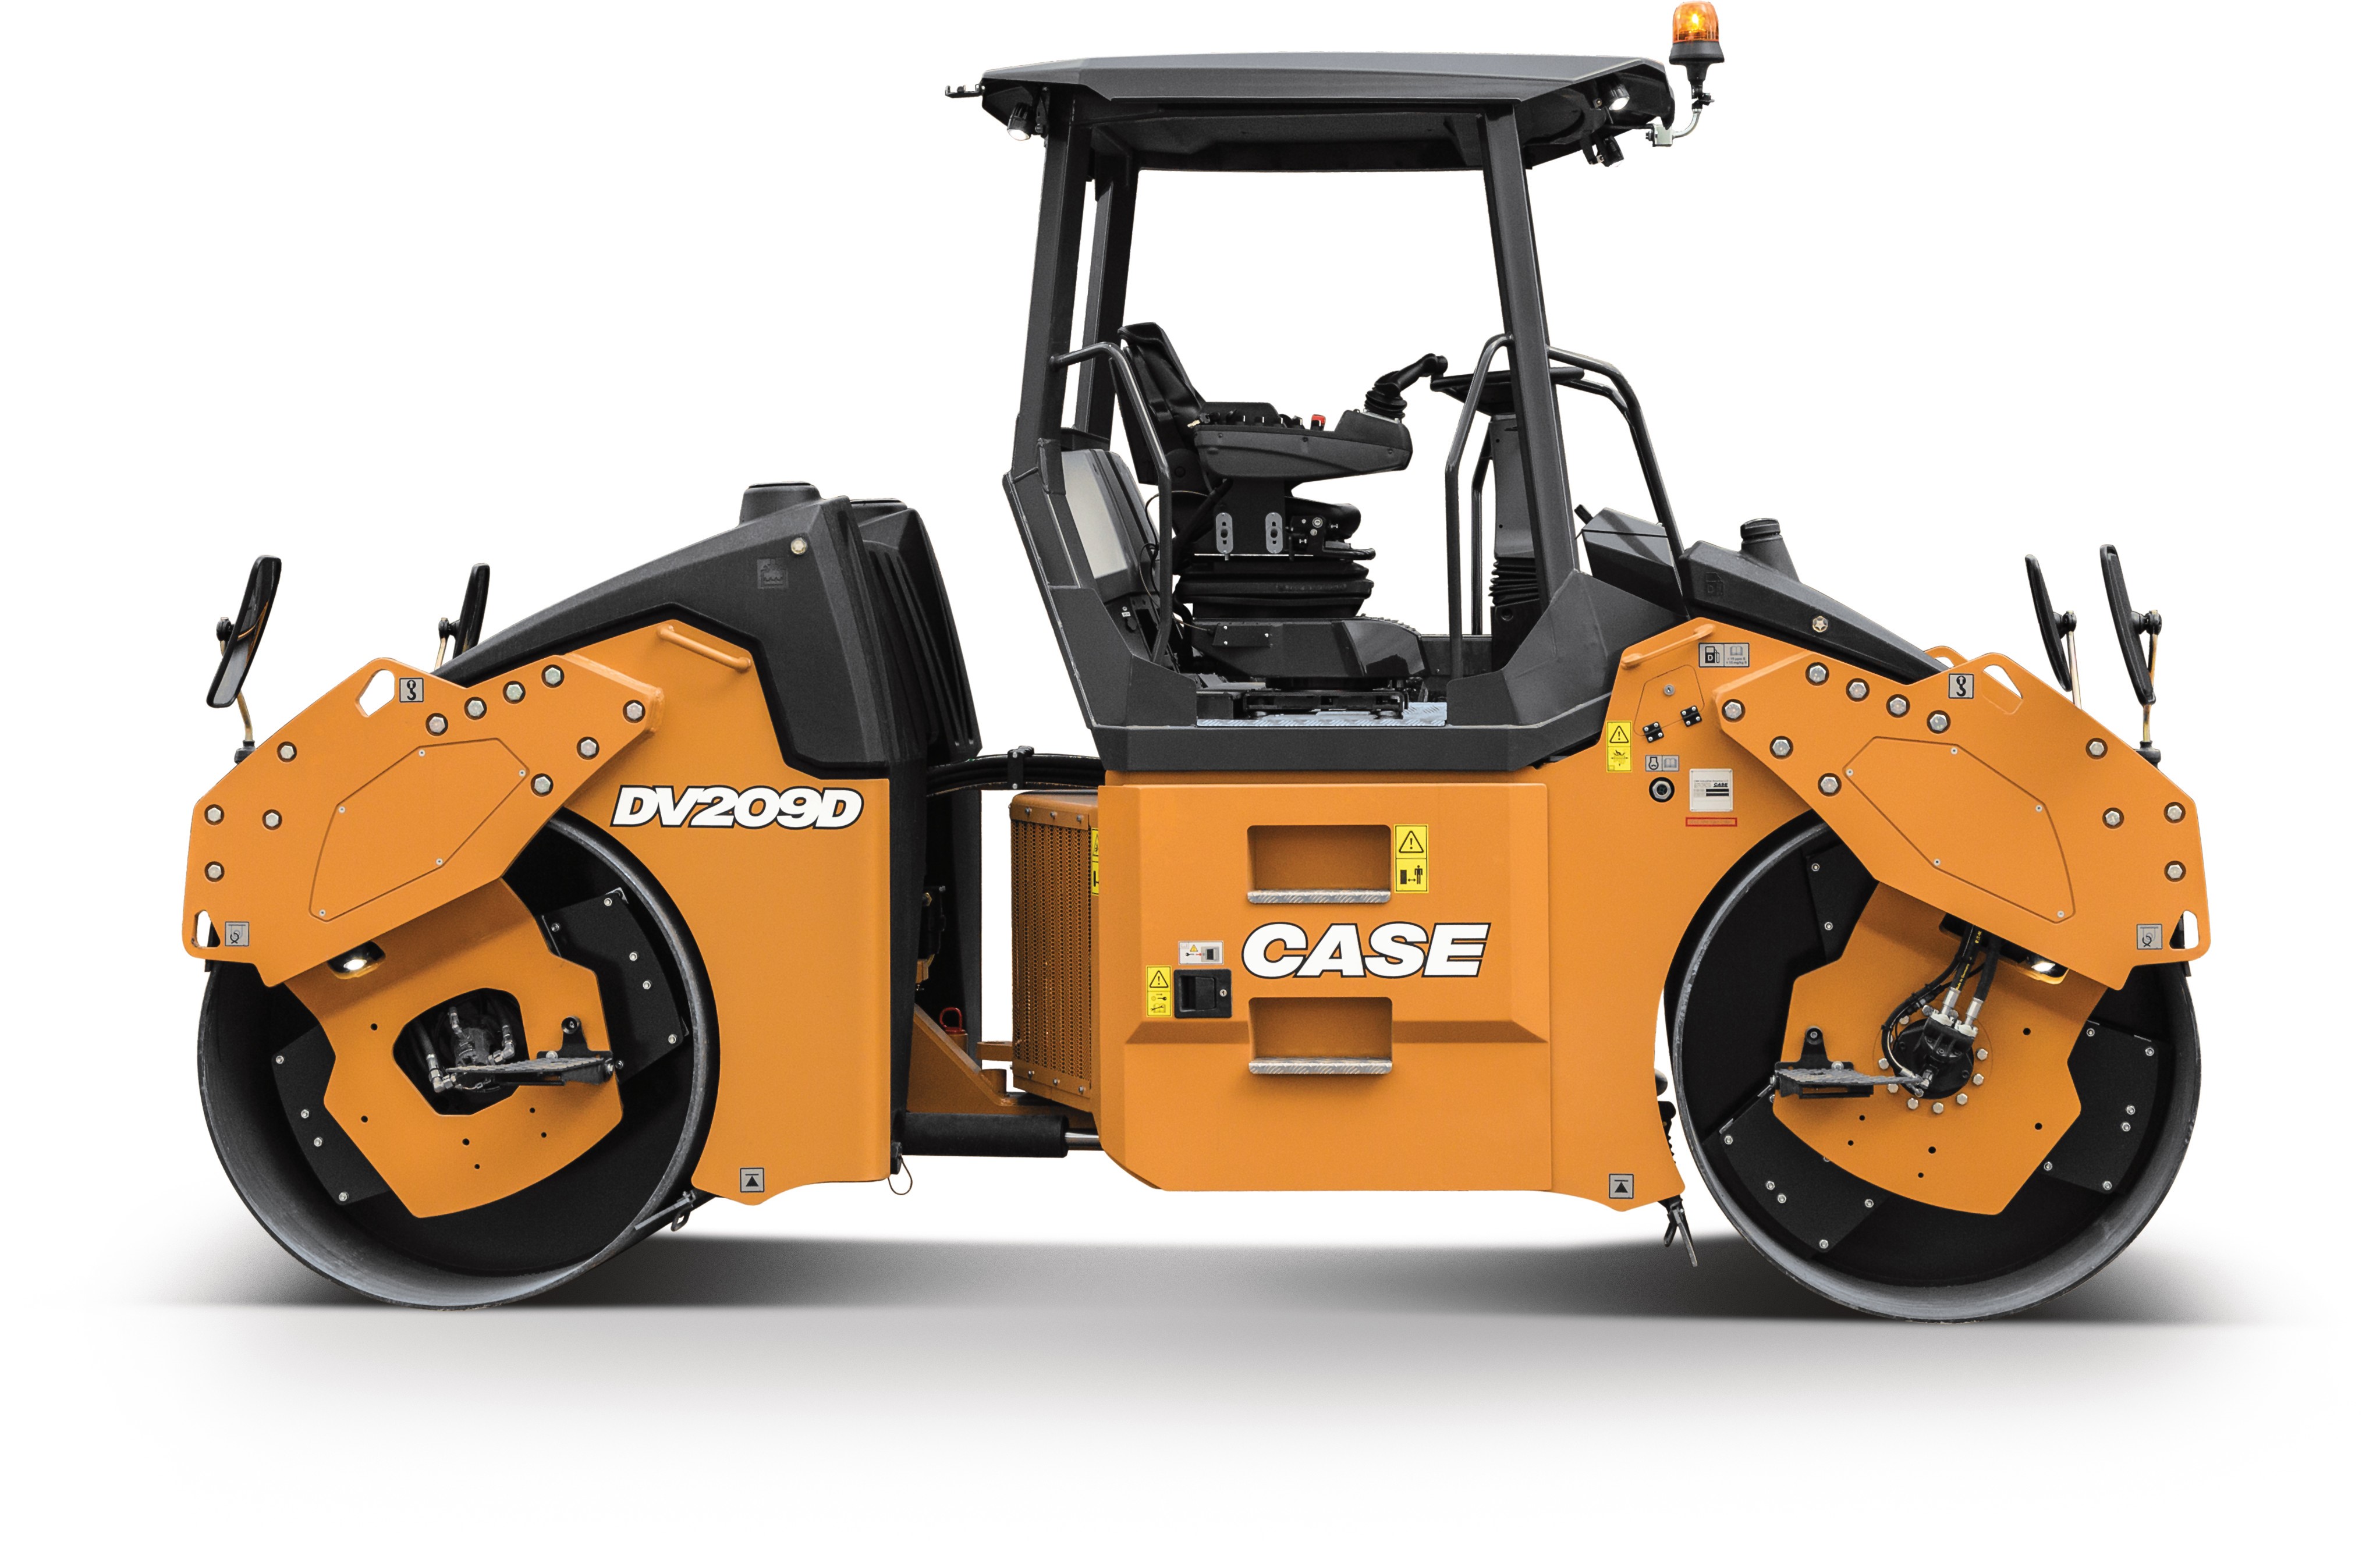 The DV209D, pictured here, and DV210D from Case Construction Equipment are designed for groundline serviceability with large swing-out doors on both sides of the machine for easy access.